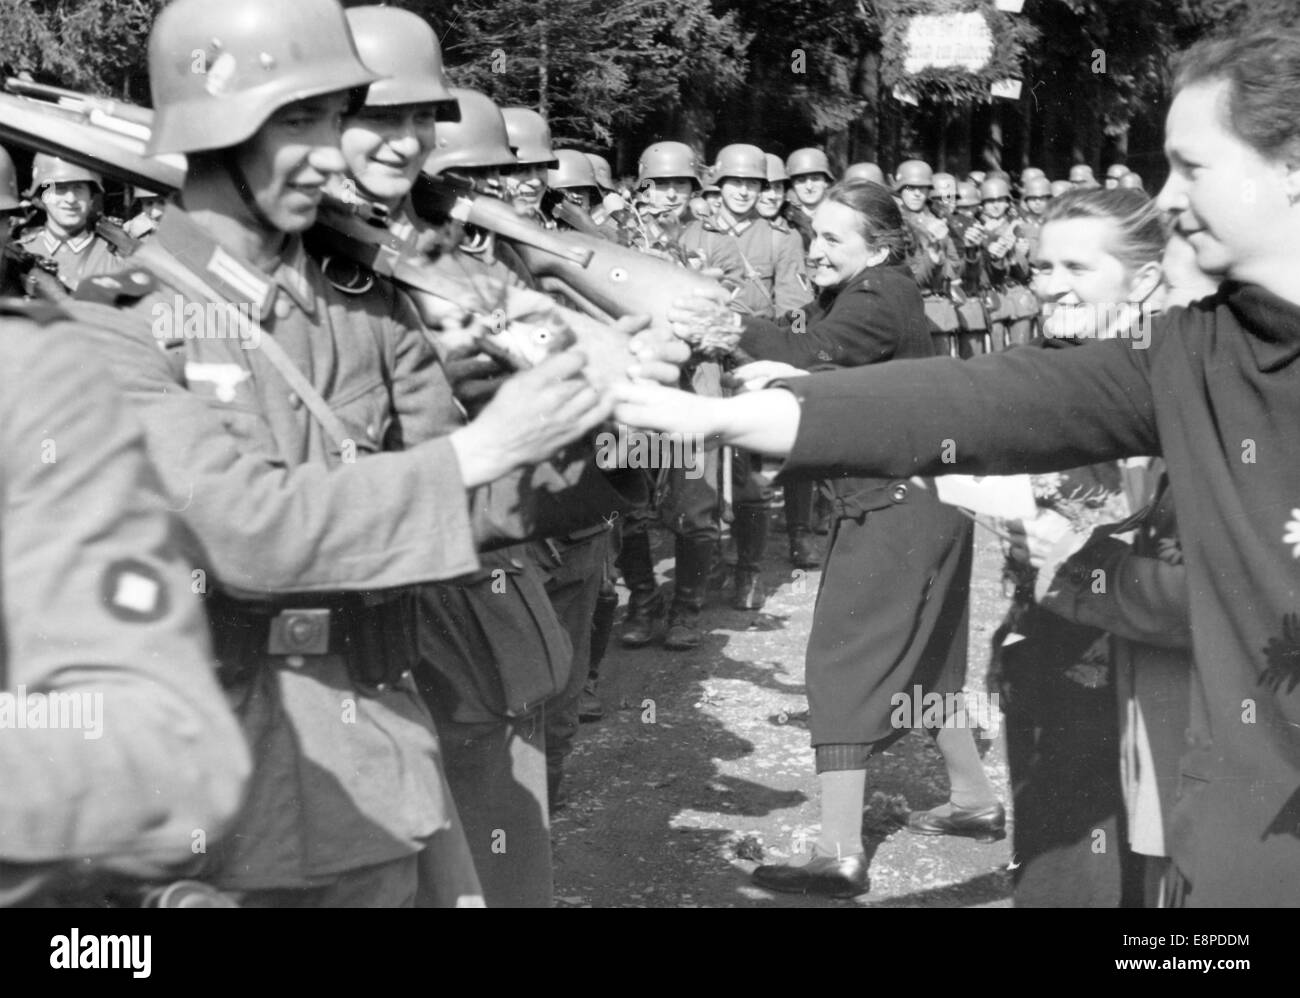 The Nazi propaganda picture shows women welcoming German troops in Braunau, Sudetenland (today Broumov, Czech Republic) in October 1938. The original text from the Nazi news service on the back of the picture reads: 'The arrival of German troops in Division V. No German soldier marches without flowers into the liberated Sudetenland: Sudeten German women decorate the soldiers marching through Braunau with flowers.' Fotoarchiv für Zeitgeschichtee - NO WIRE SERVICE Stock Photo